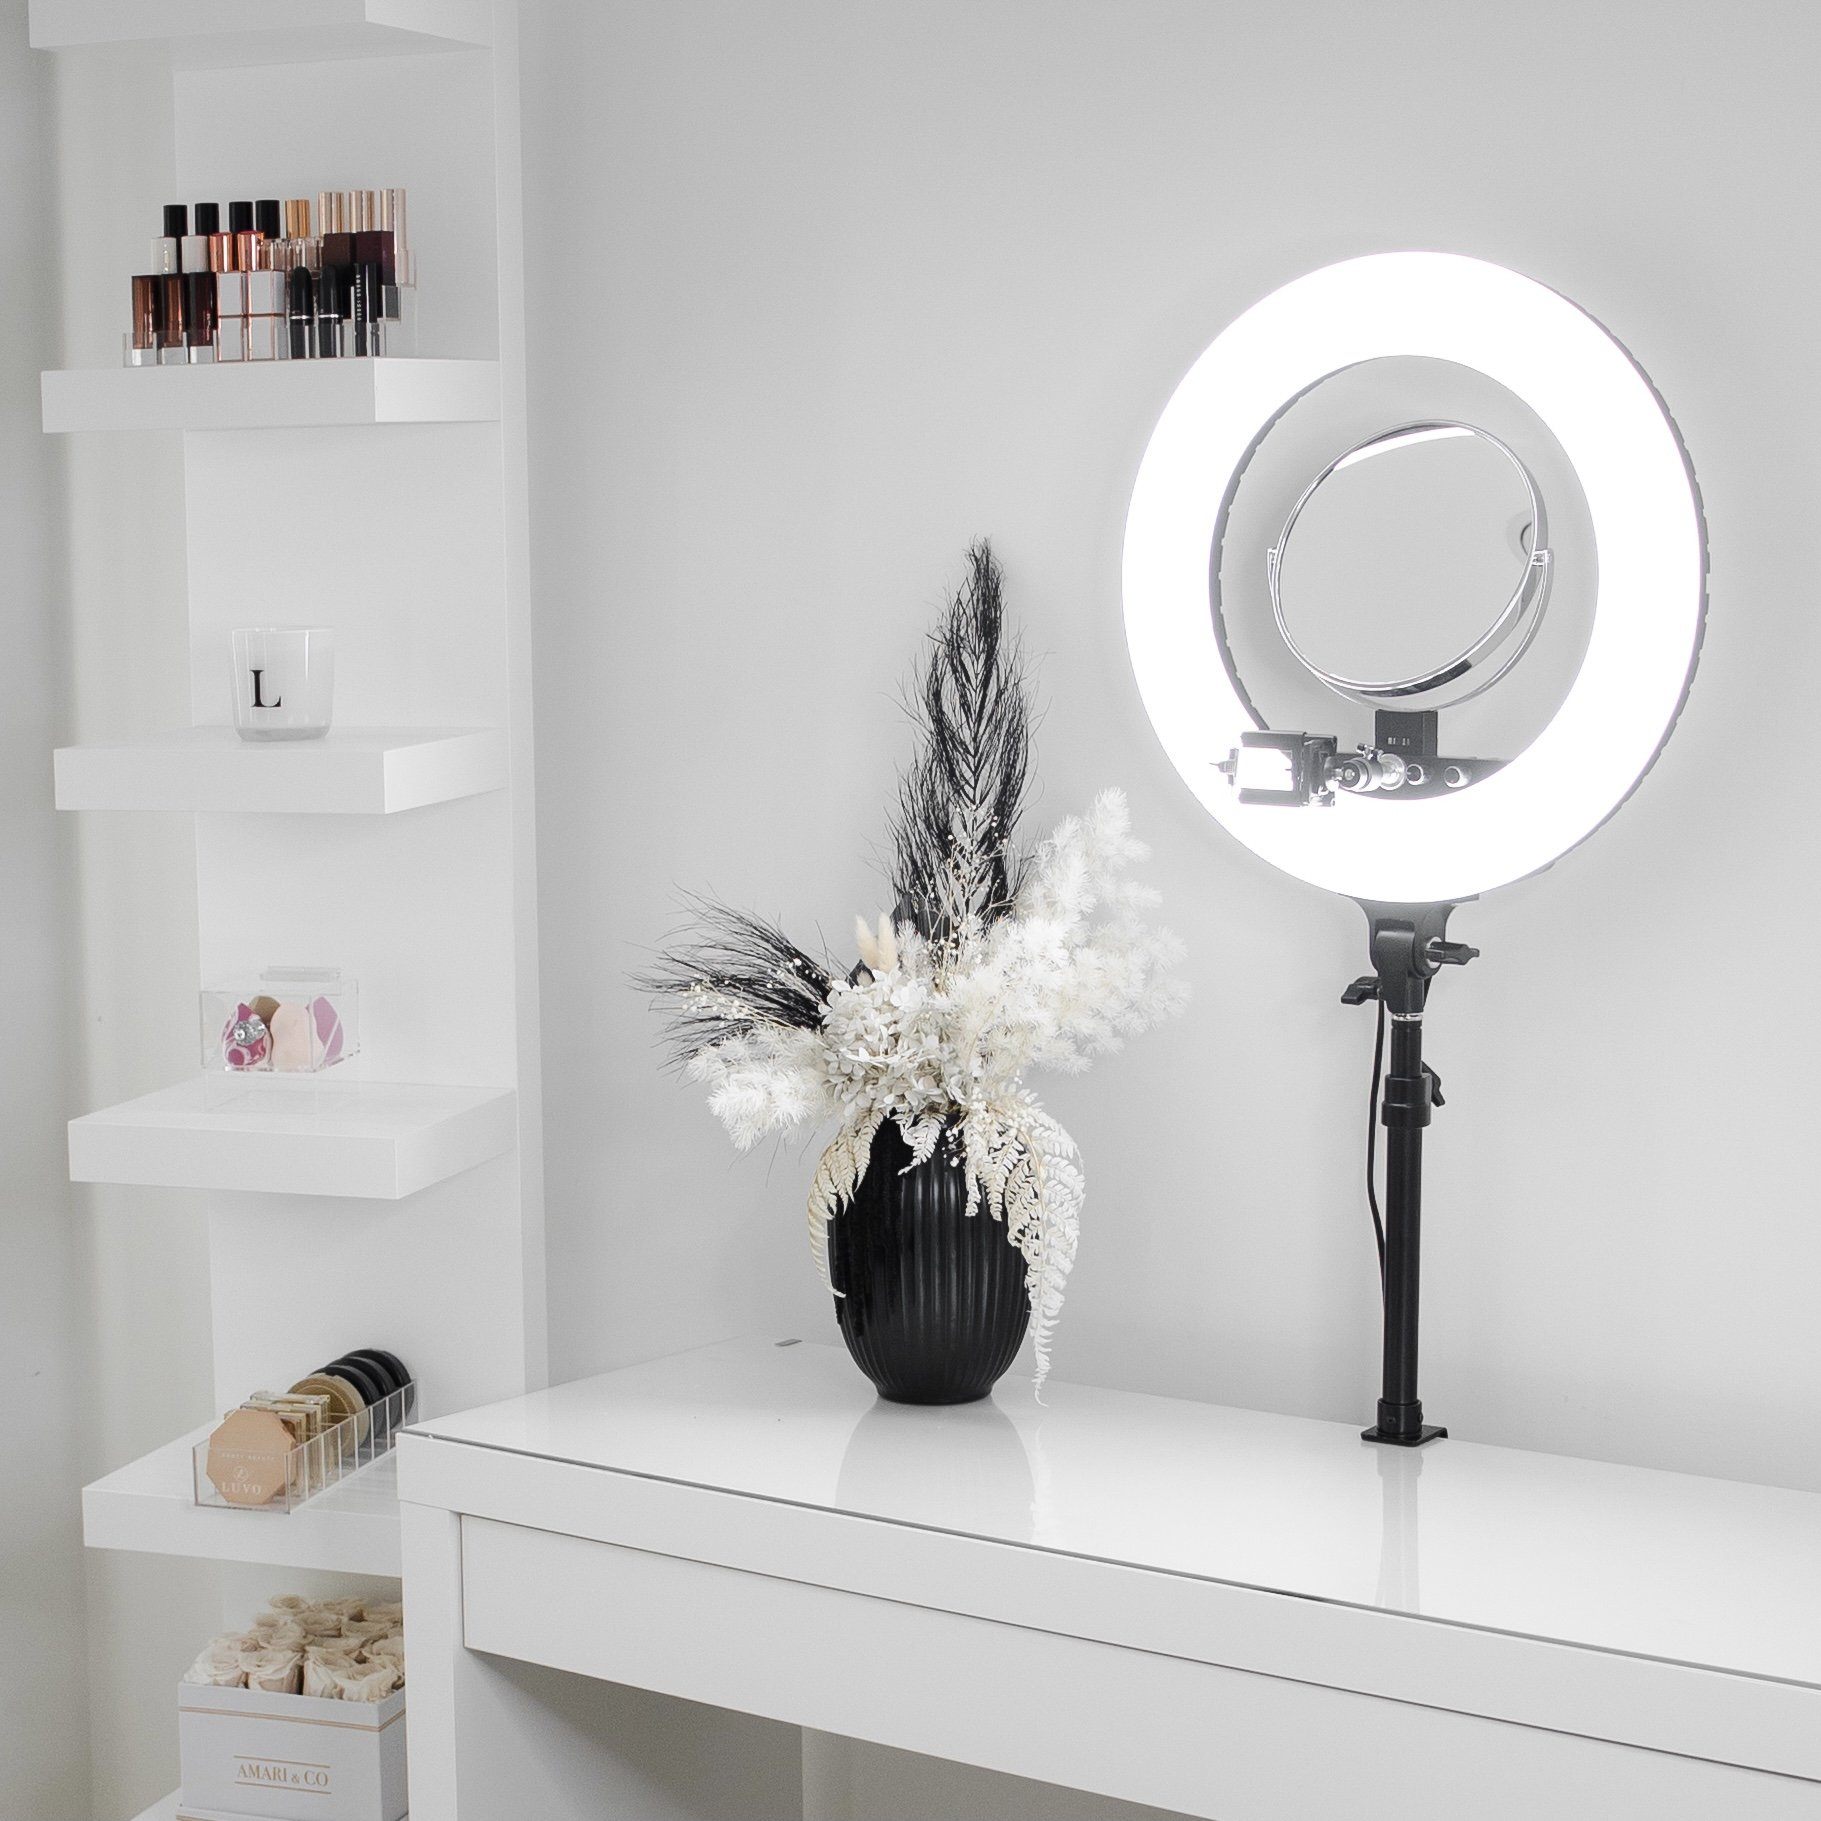 GlowPro 2 Ring Light - Essential For Makeup Artists - Luvo Store